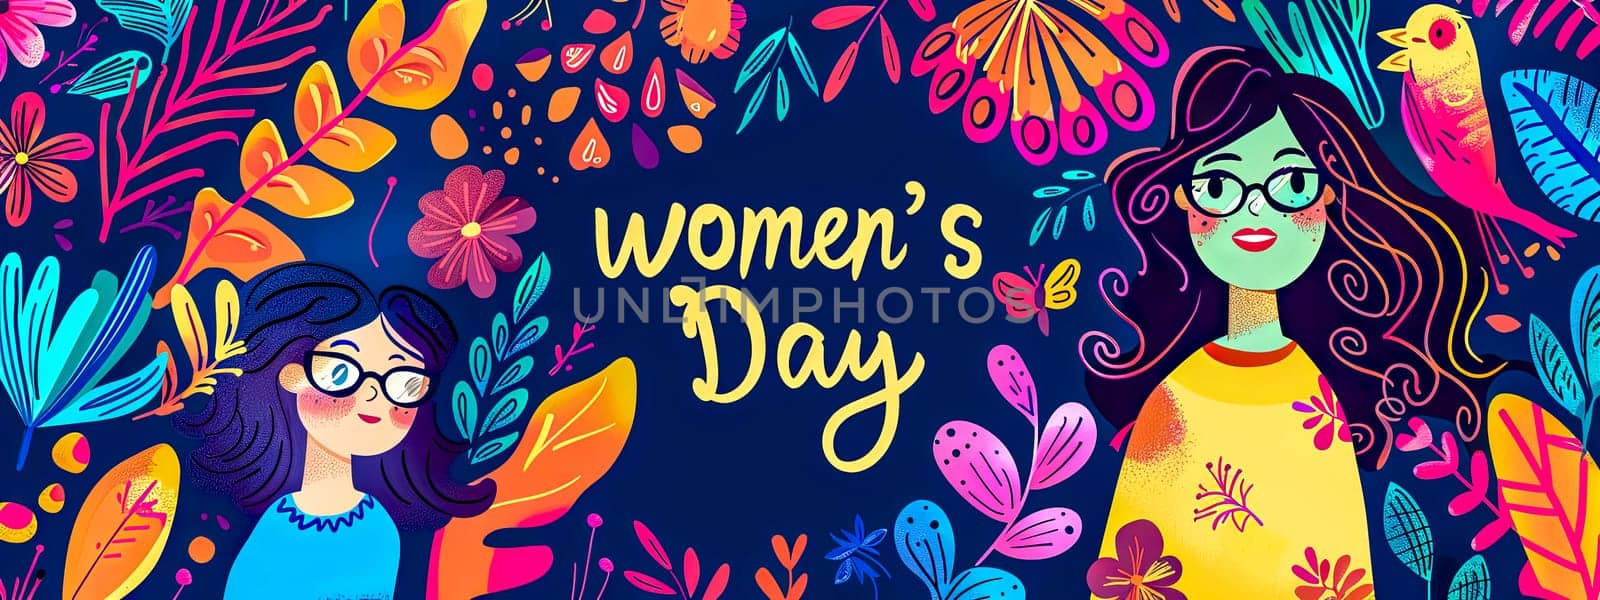 Colorful artwork celebrating women's day with illustrated women, floral motifs, and a bird